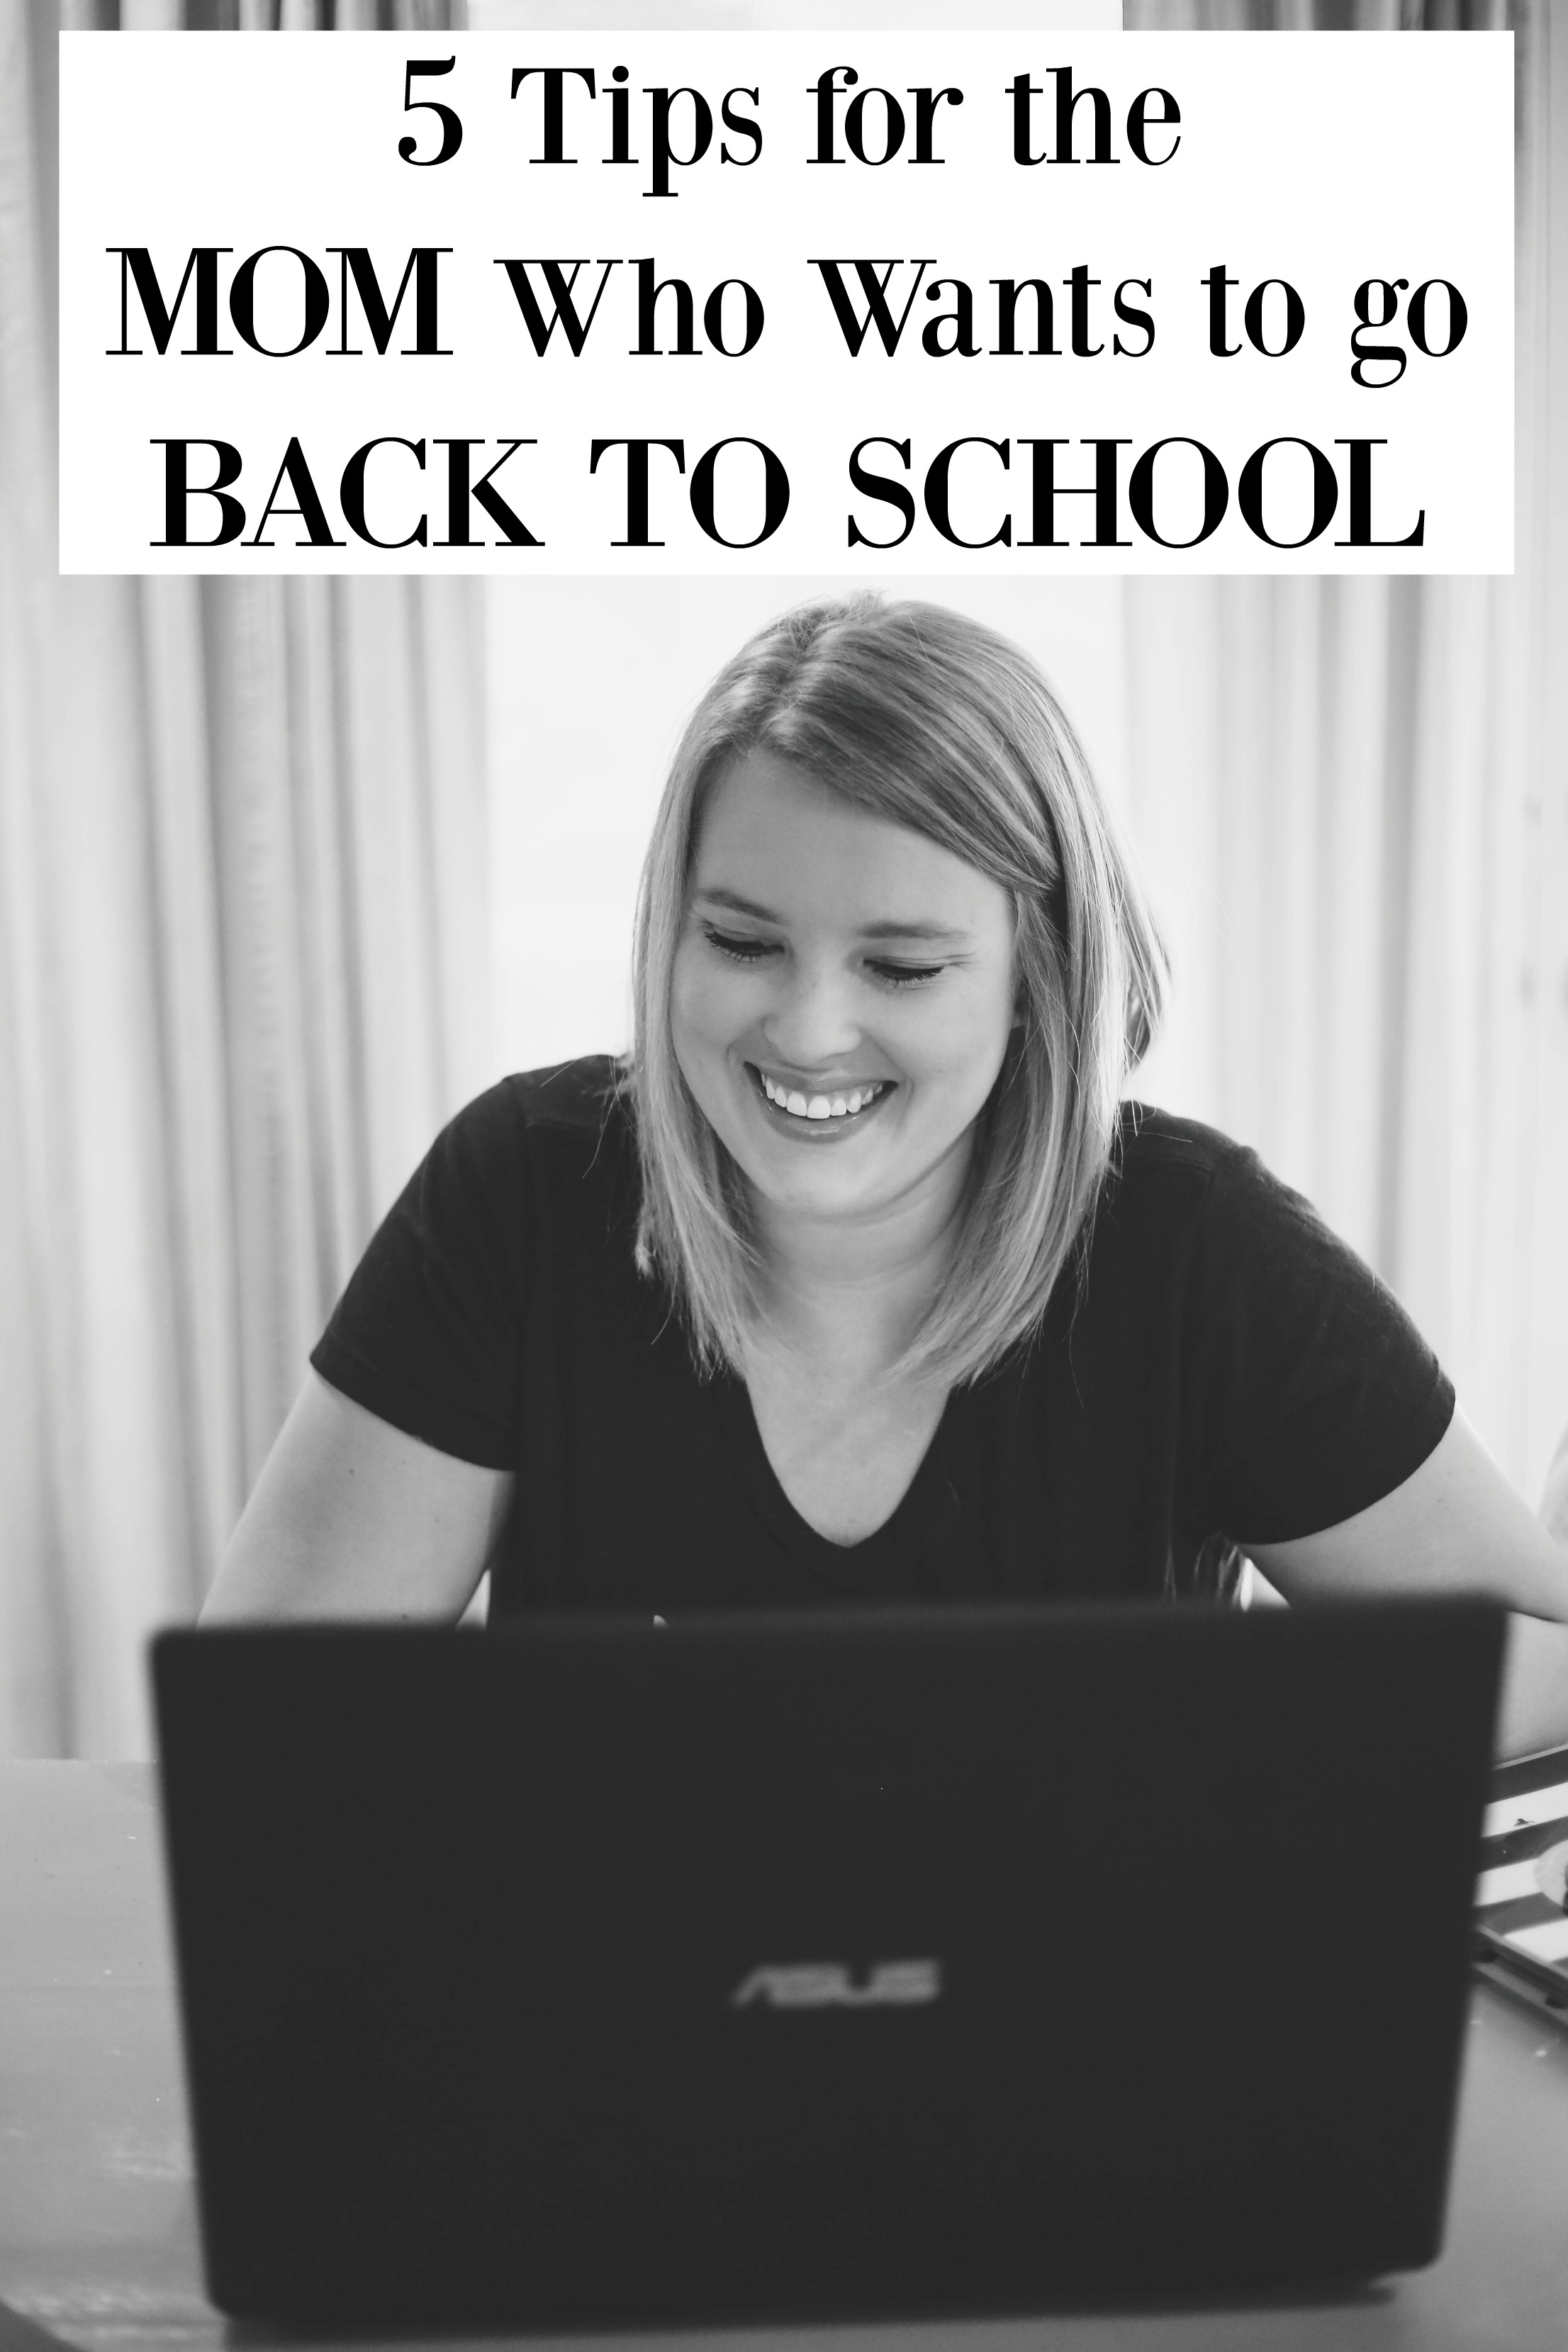 5 Tips for the Mom Who Wants to Go Back to School